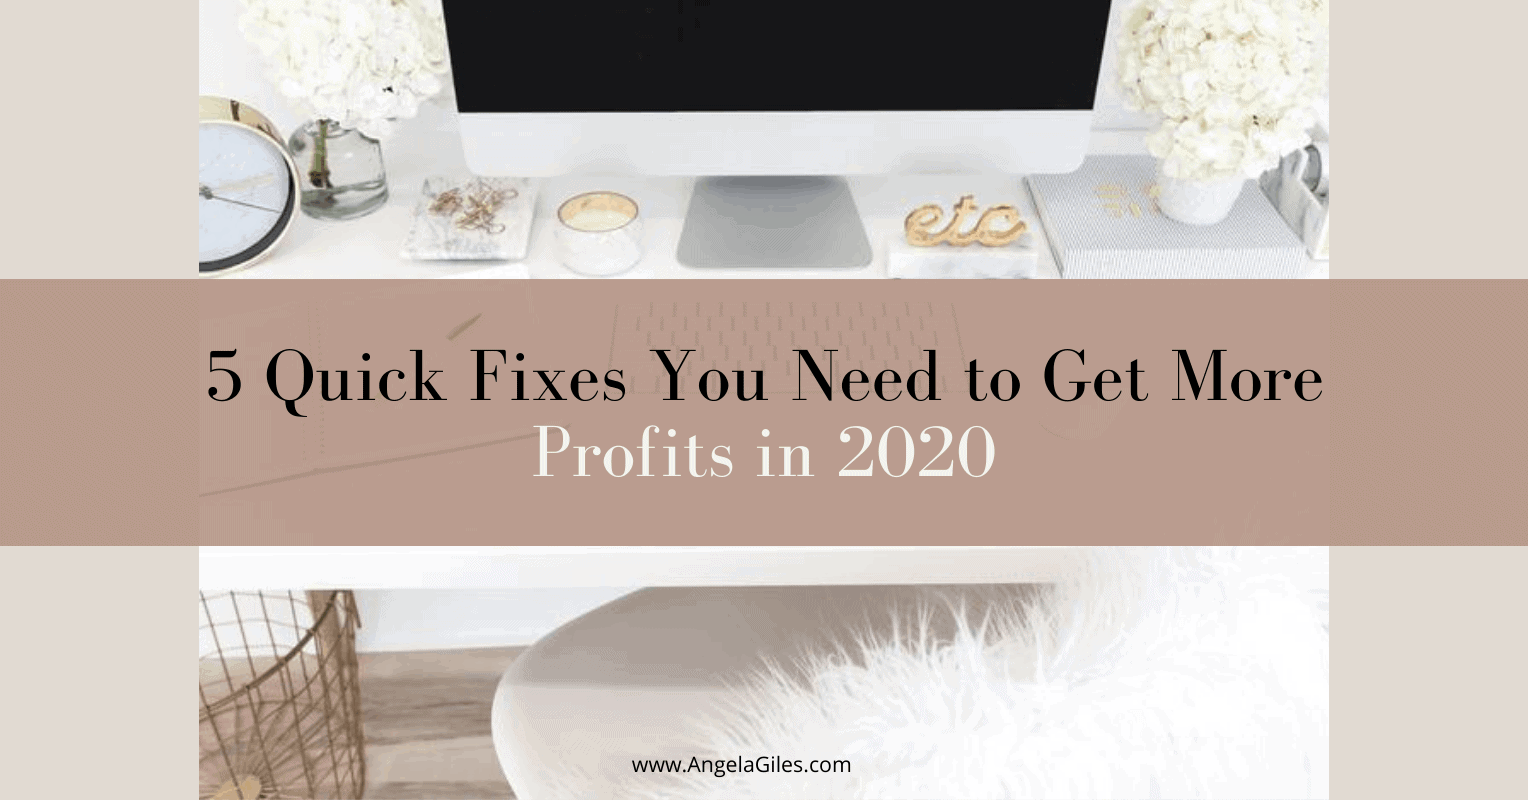 5 Quick Fixes You need to Get More Profits in 2020